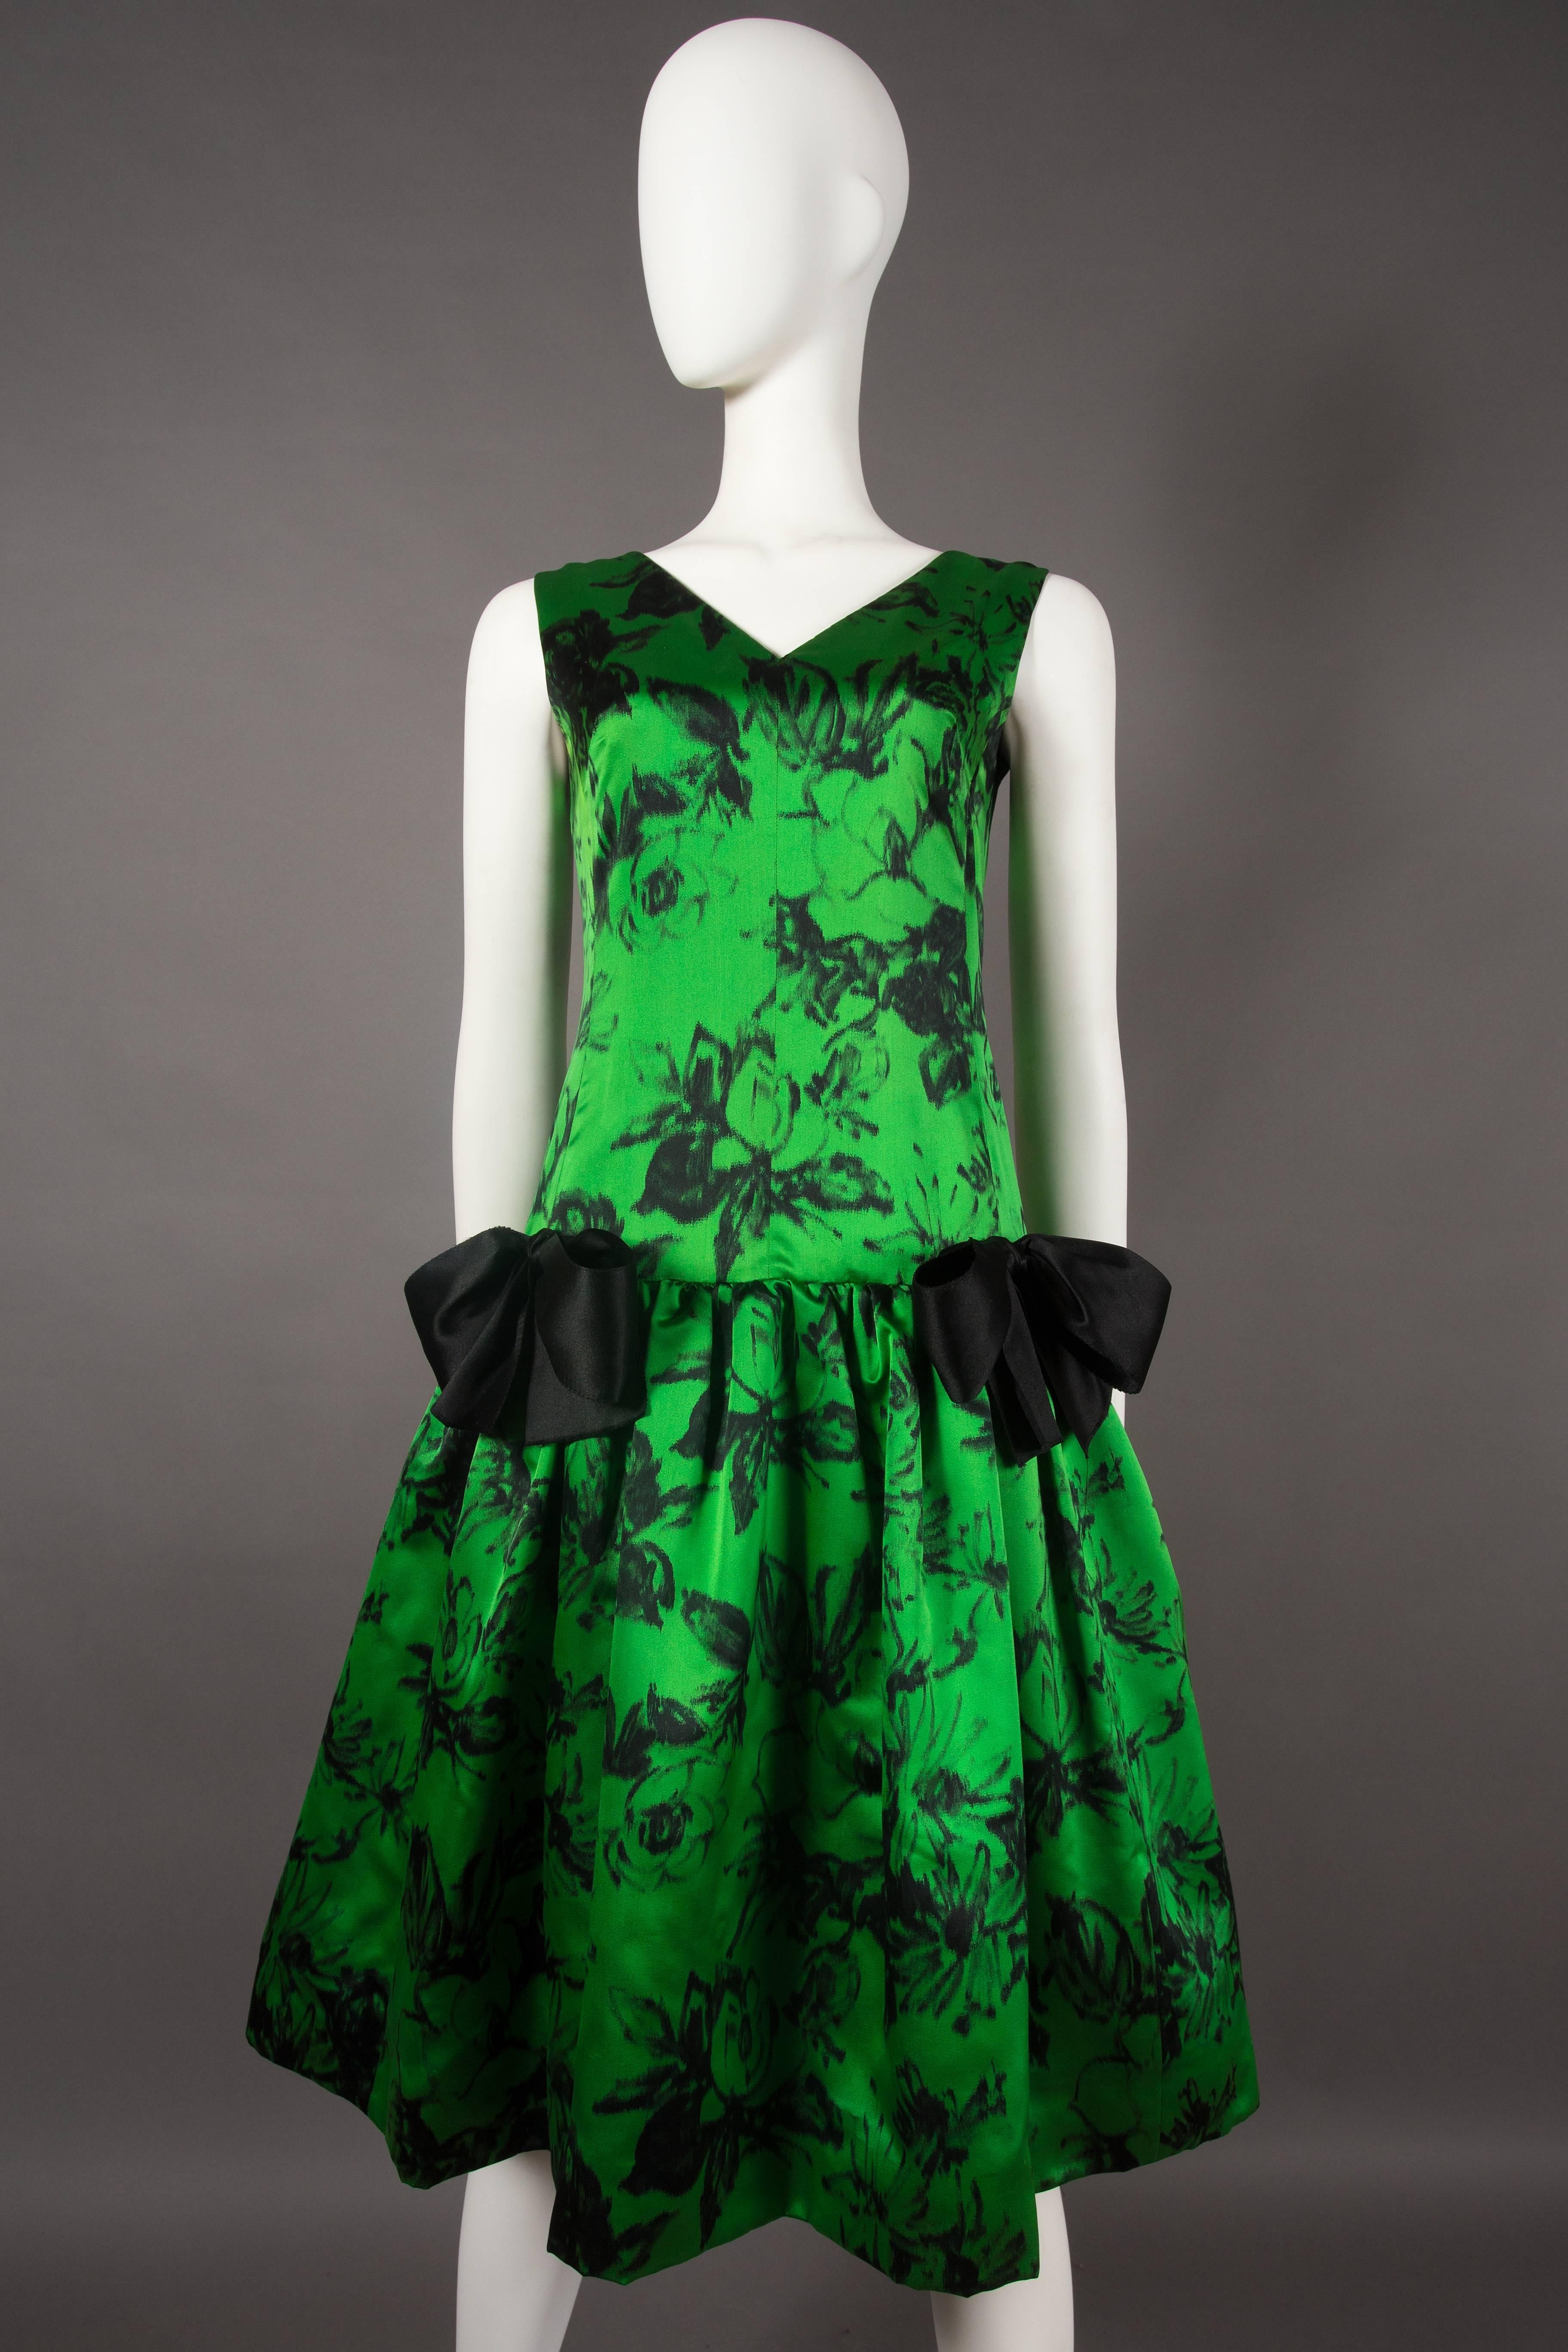 Presenting an exquisite and exceptionally rare Paul Daunay cocktail dress, a true treasure dating back to circa 1952-57. Crafted with finesse, this dress boasts a fine silk fabric adorned with an abstract floral print, exuding timeless elegance and